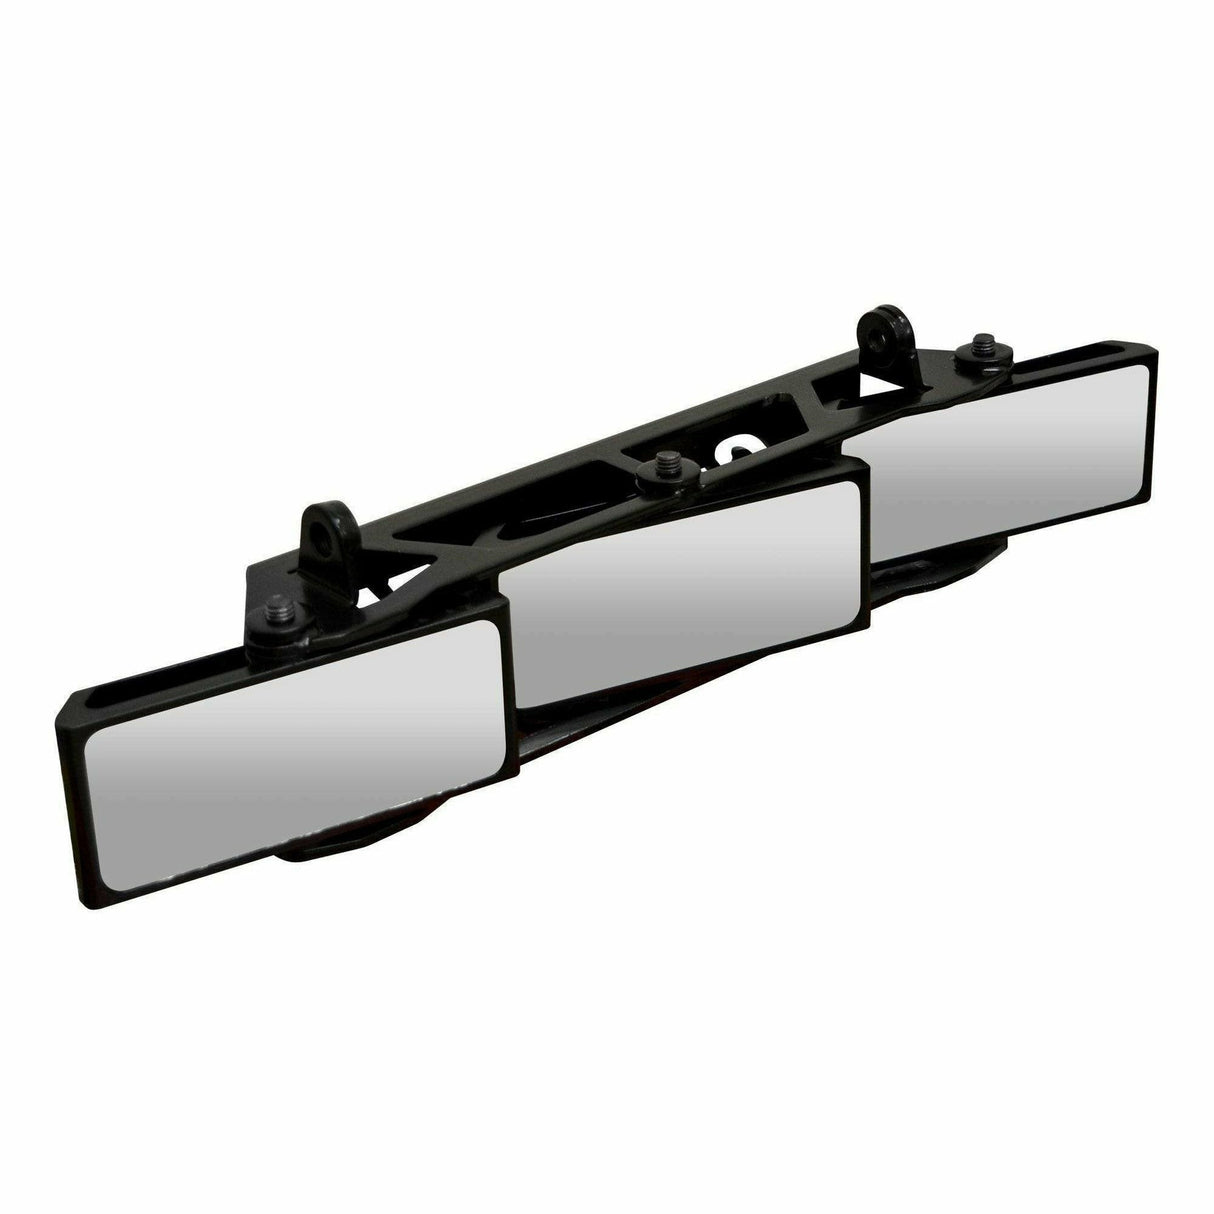 3 Panel Rear View Mirror with 1.75" Clamps